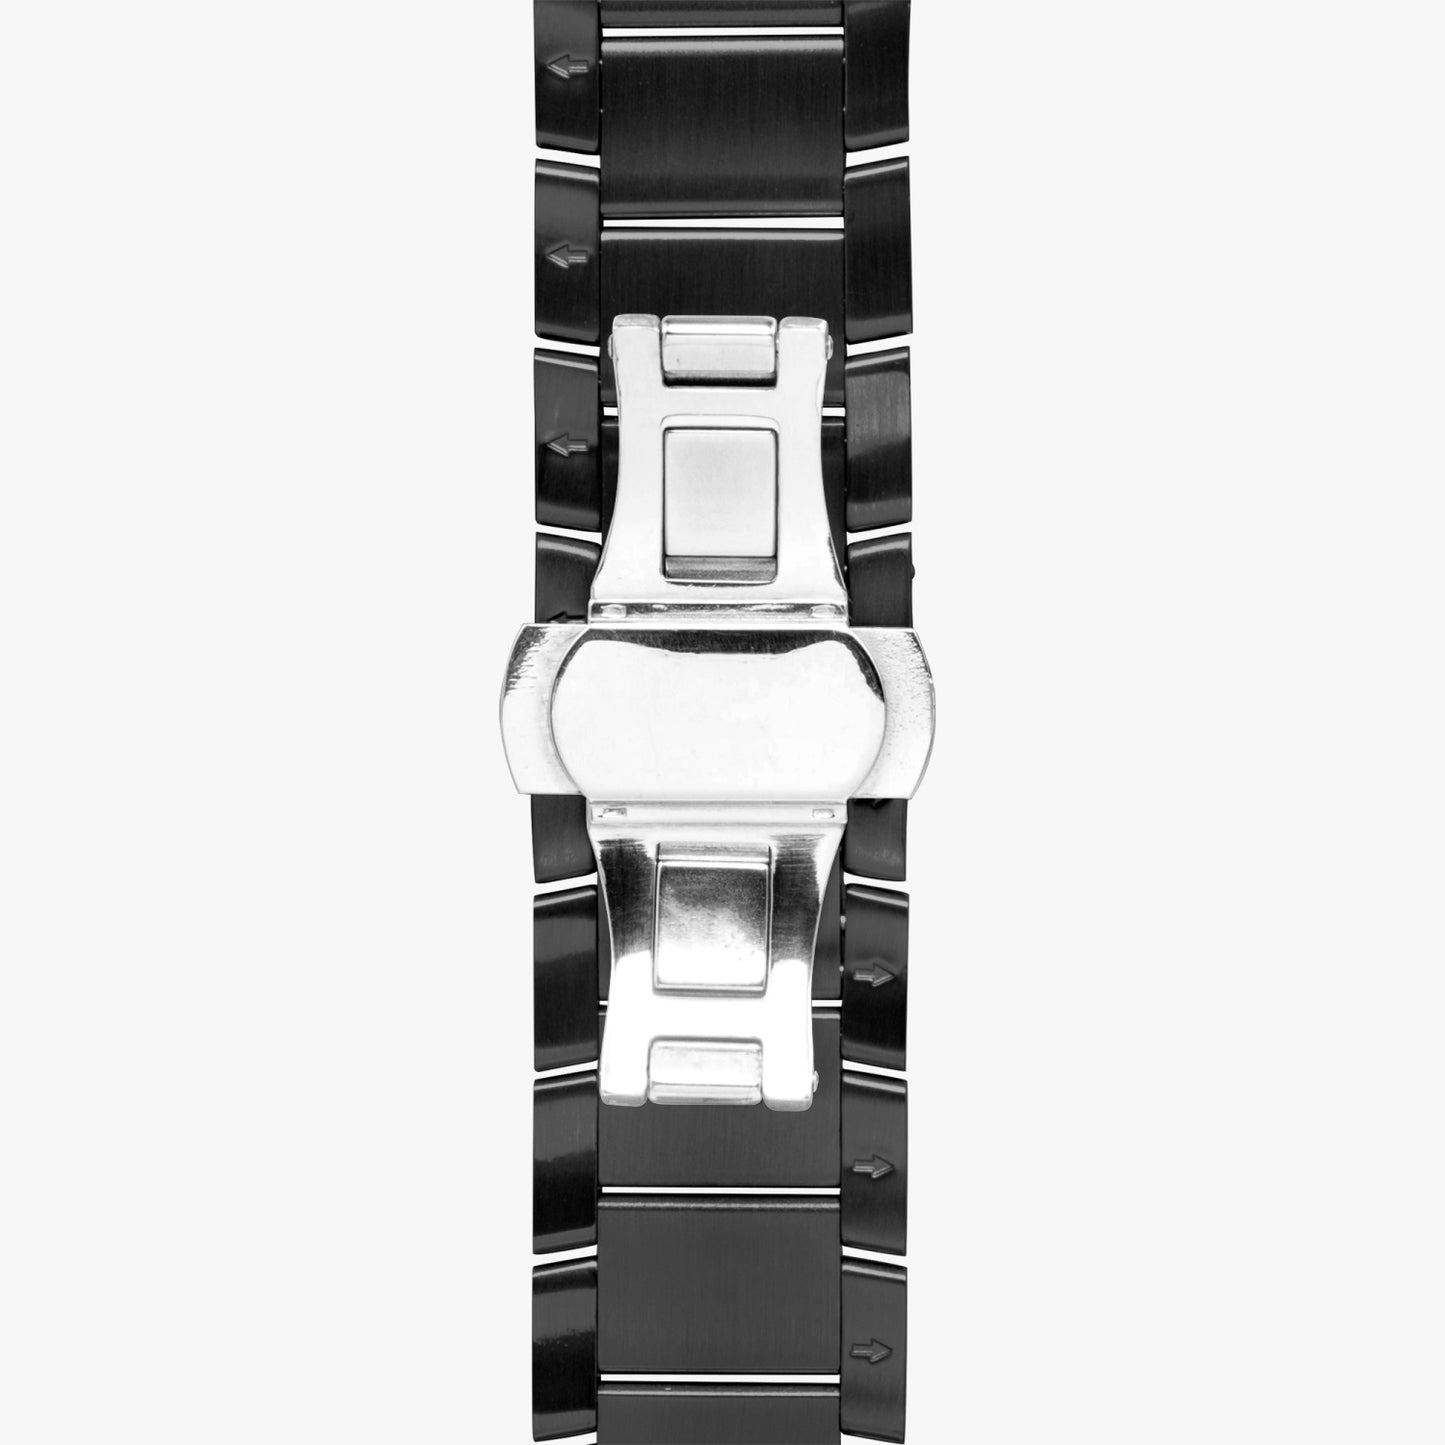 Muvr Steel Strap Automatic Watch